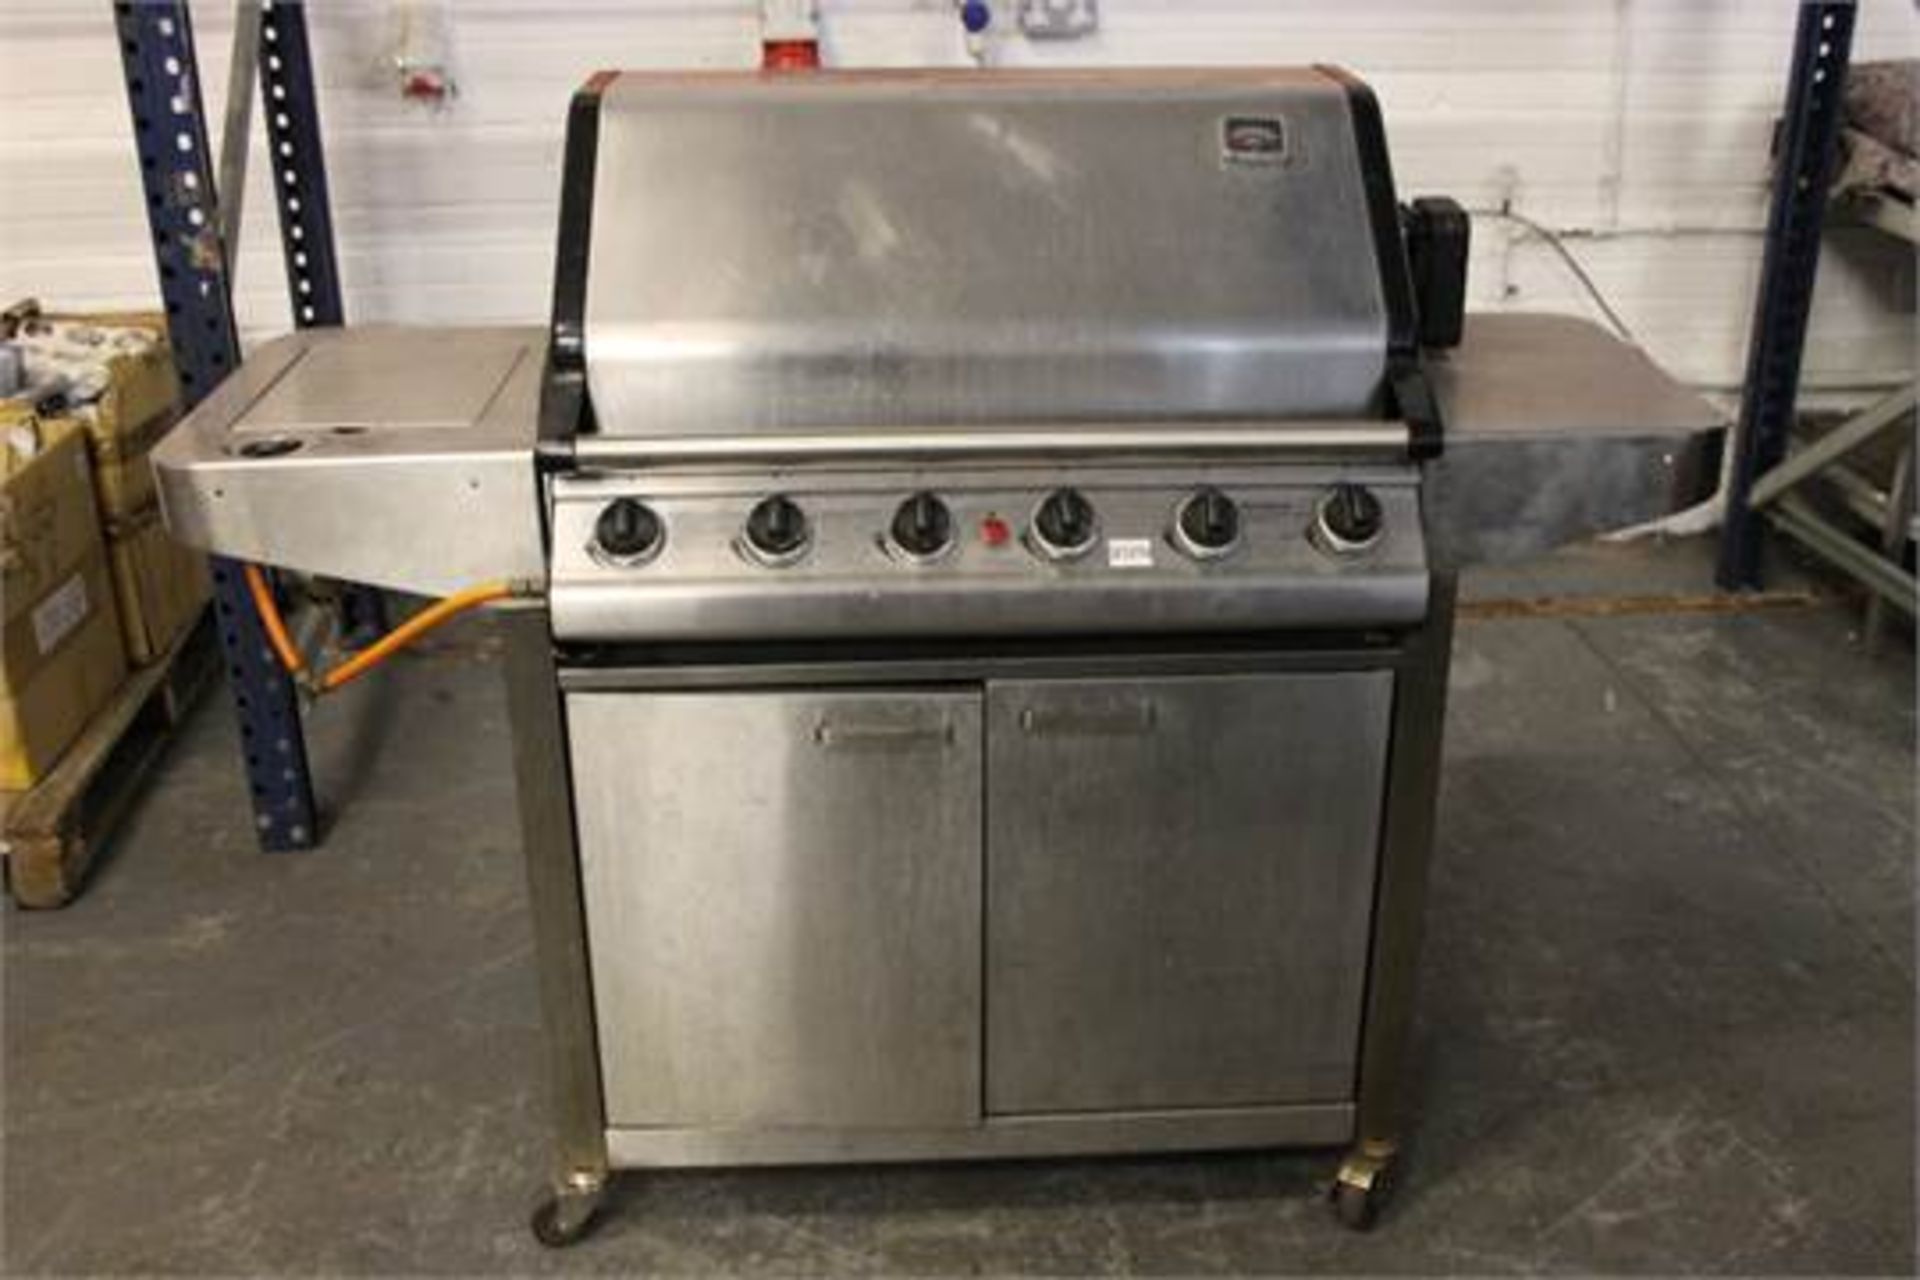 Montana Six Burner Gas Barbecue – Stock Pot Burner on wheels -with weather cover – NO VAT - Image 2 of 3